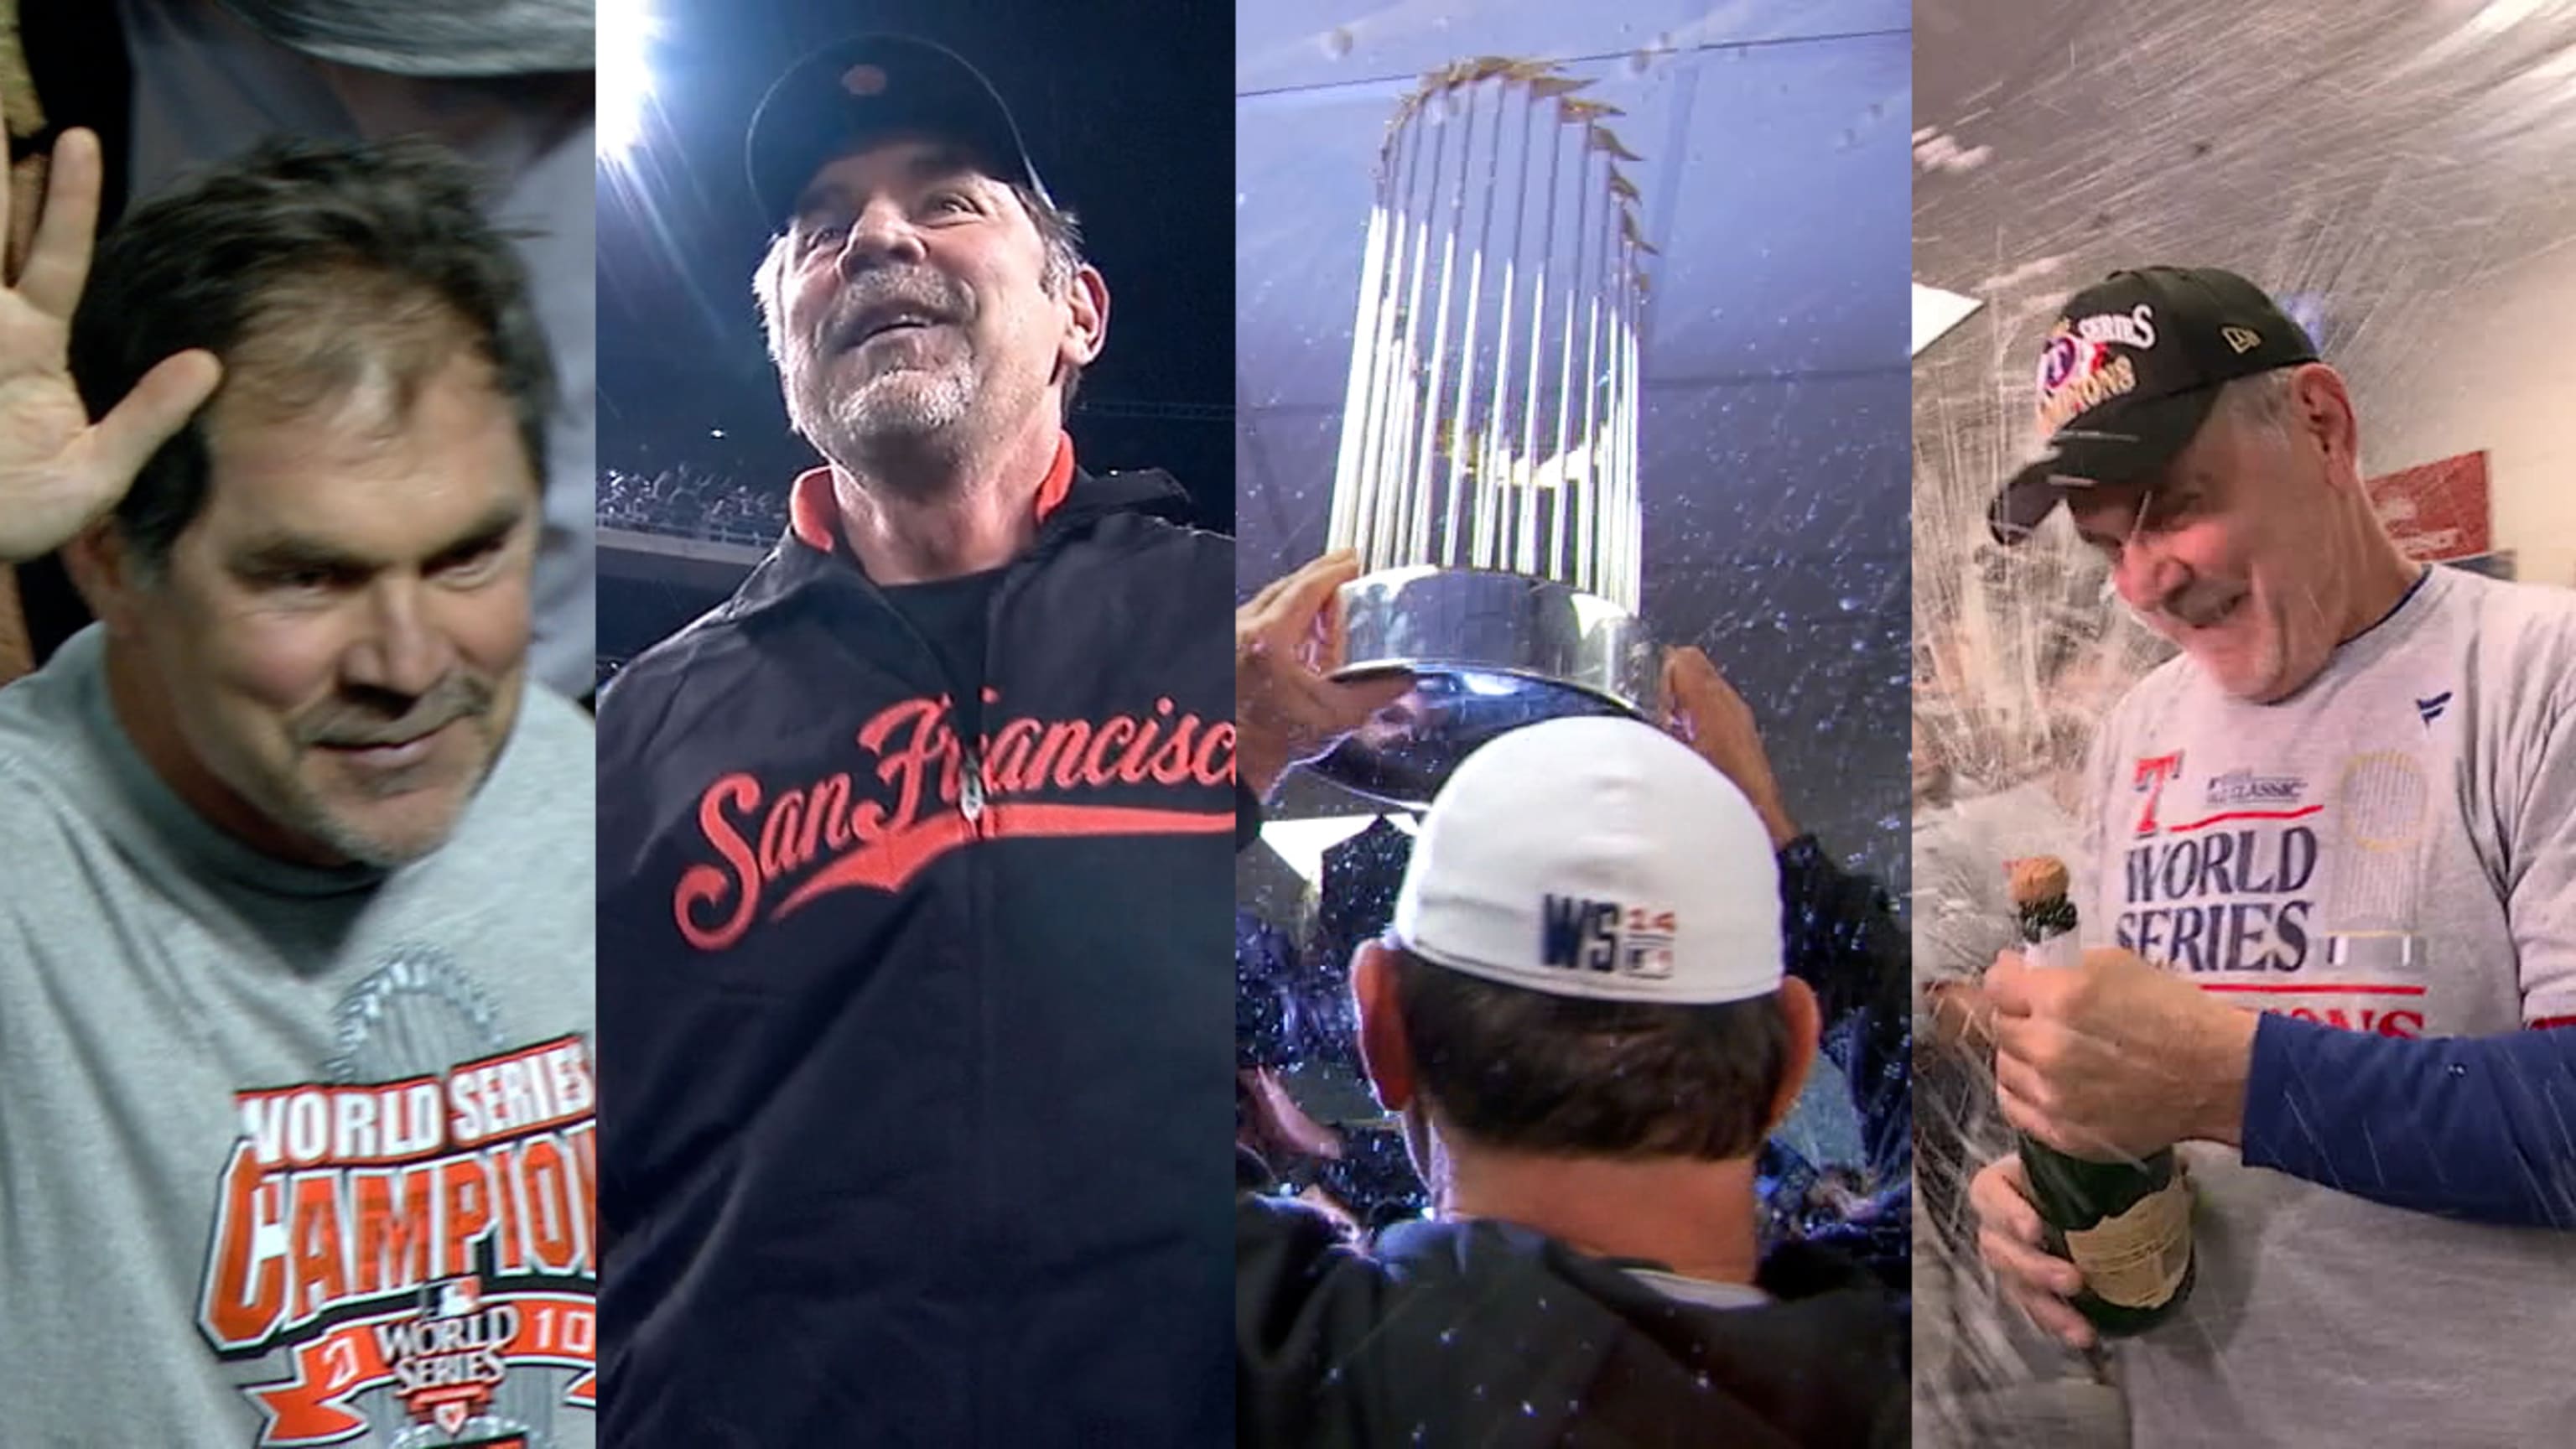 How One Stat Explains The Last Three World Series Champions